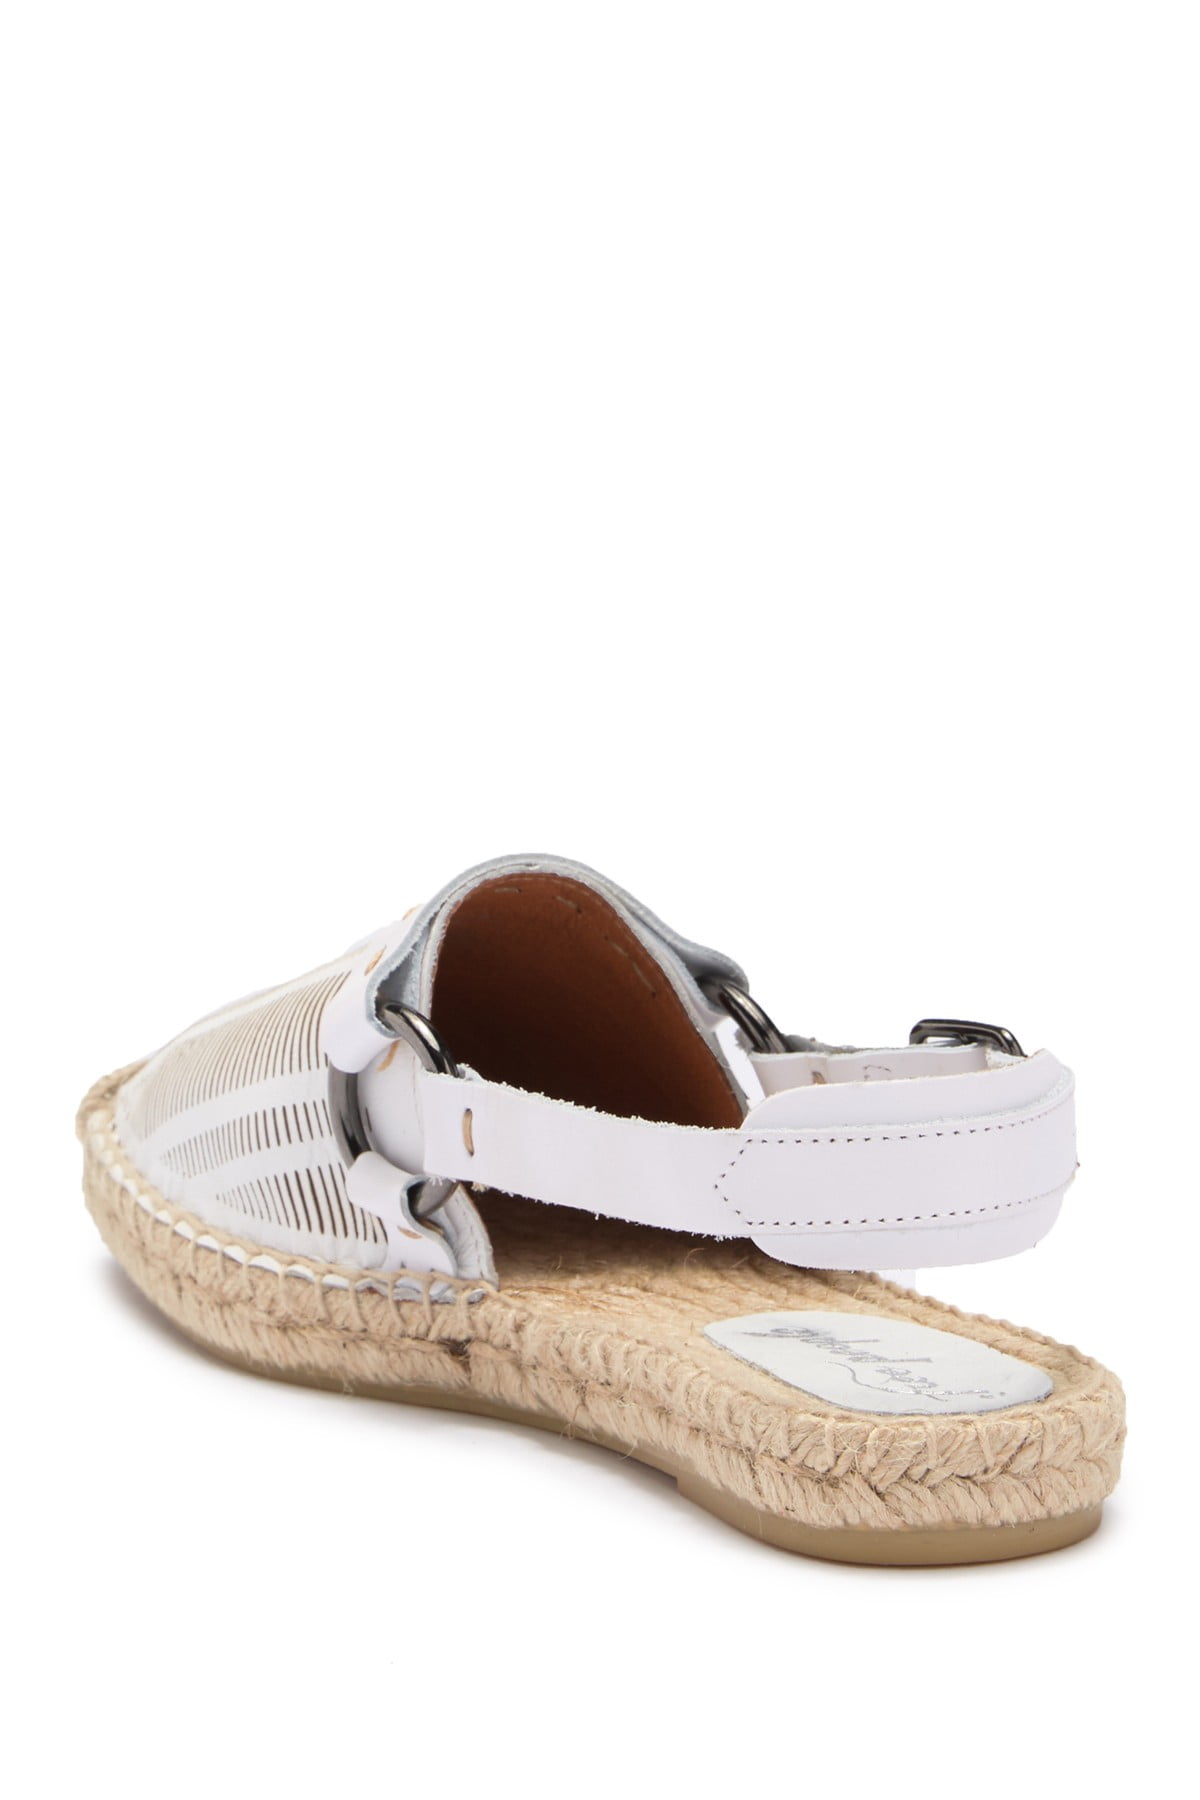 free people cabo espadrille